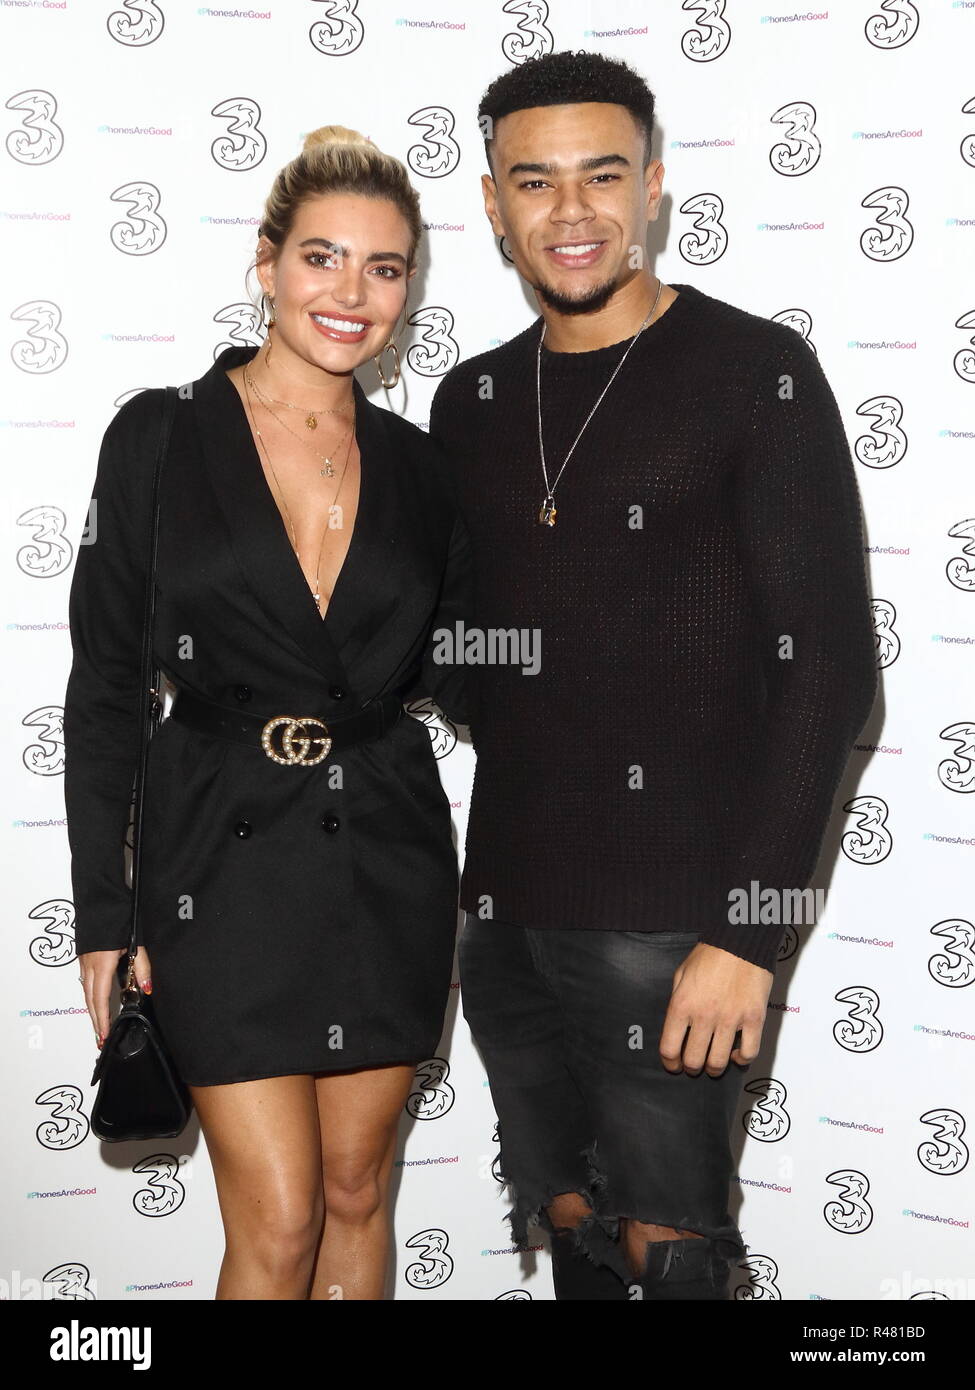 Portr8’s Three Mobiles VIP Gallery Launch at Three Mobile Pop-Up Gallery, Soho Square, London  Featuring: Megan Barton Hanson, Wes Nelson Where: London, United Kingdom When: 25 Oct 2018 Credit: WENN.com Stock Photo